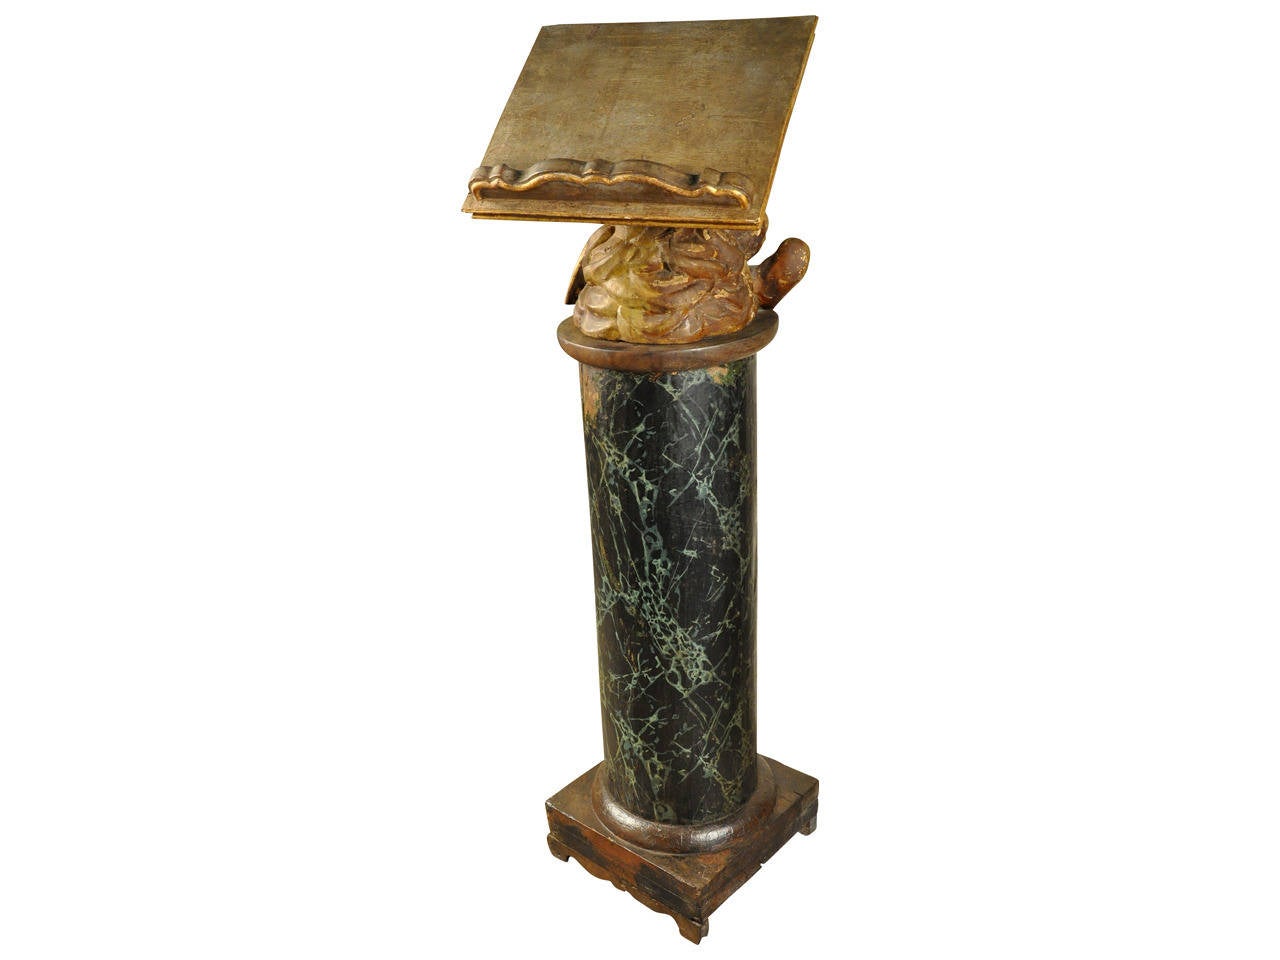 A stunning and exceptional 17th century ecclesiastical lectern from the north of Italy. The solid wood column has a polychromed faux marble finish as verde antico marble. The putti support of the book rest is in giltwood and rotates. The book rest